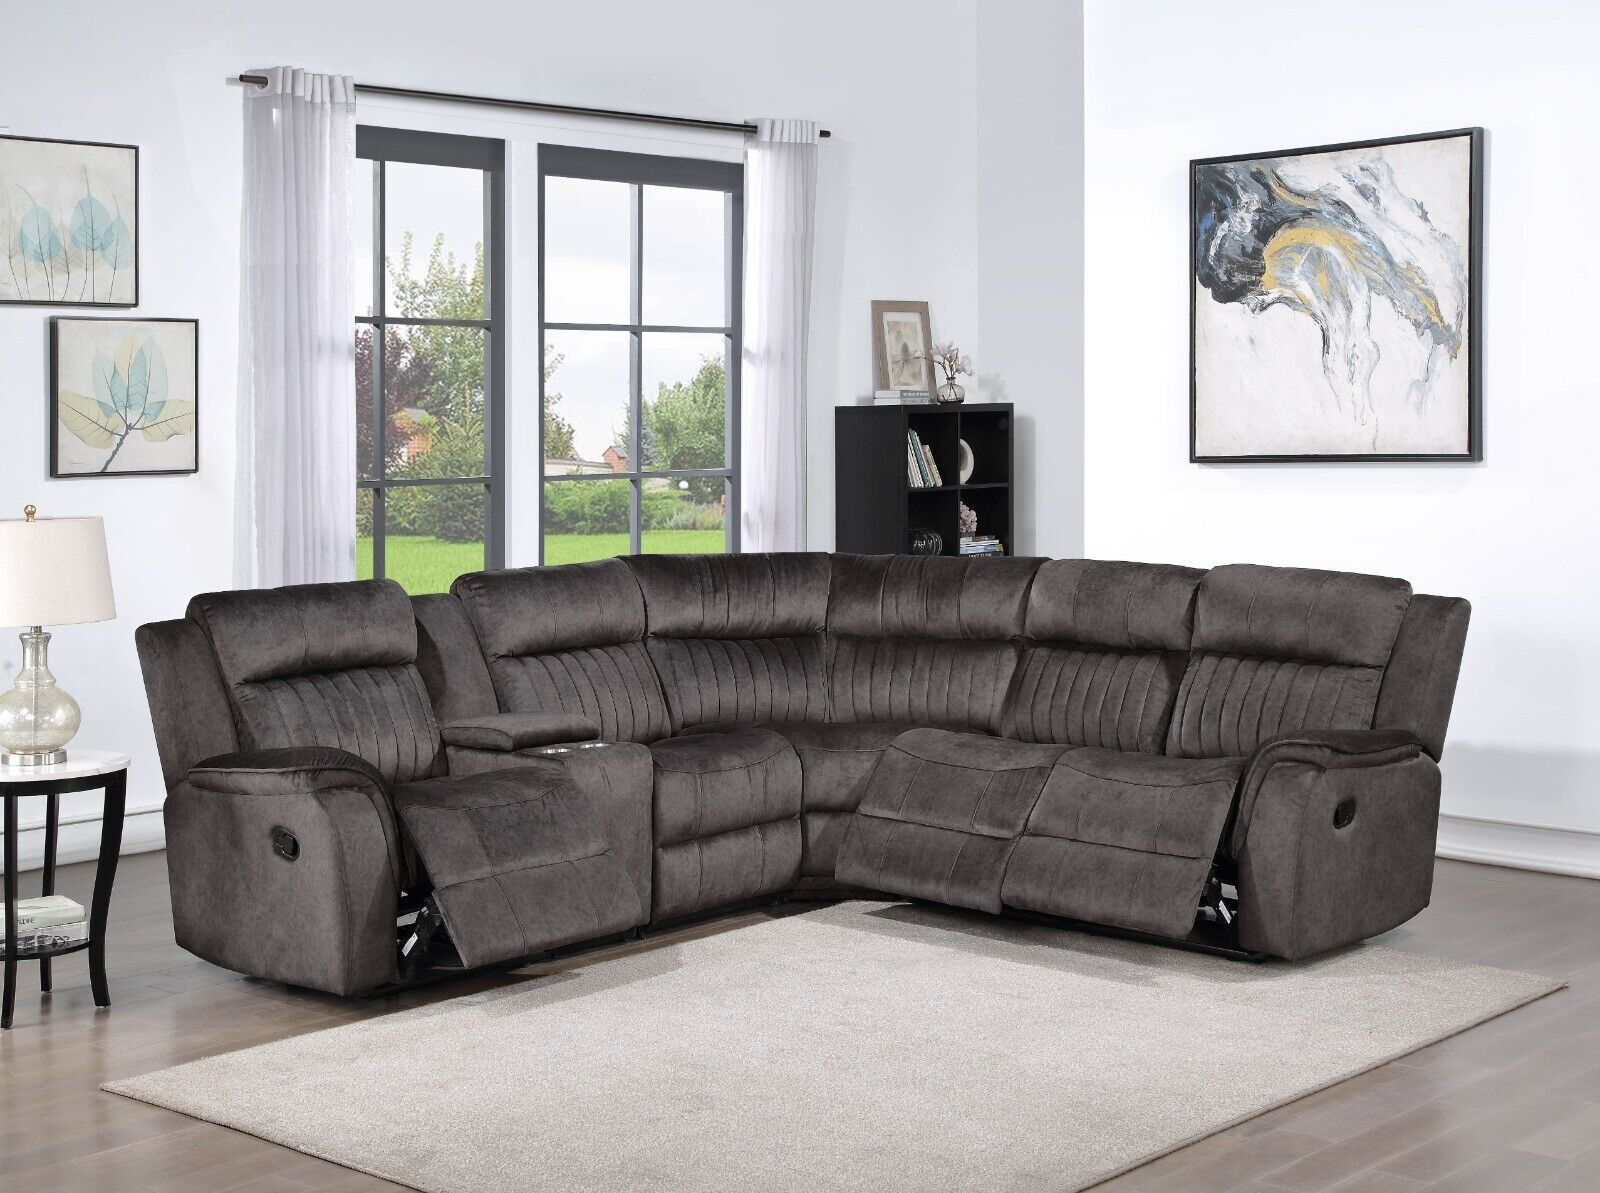 Esofastore Dark Gray Fabric Modular Sectional Sofa with Manual Recliner and Storage Console